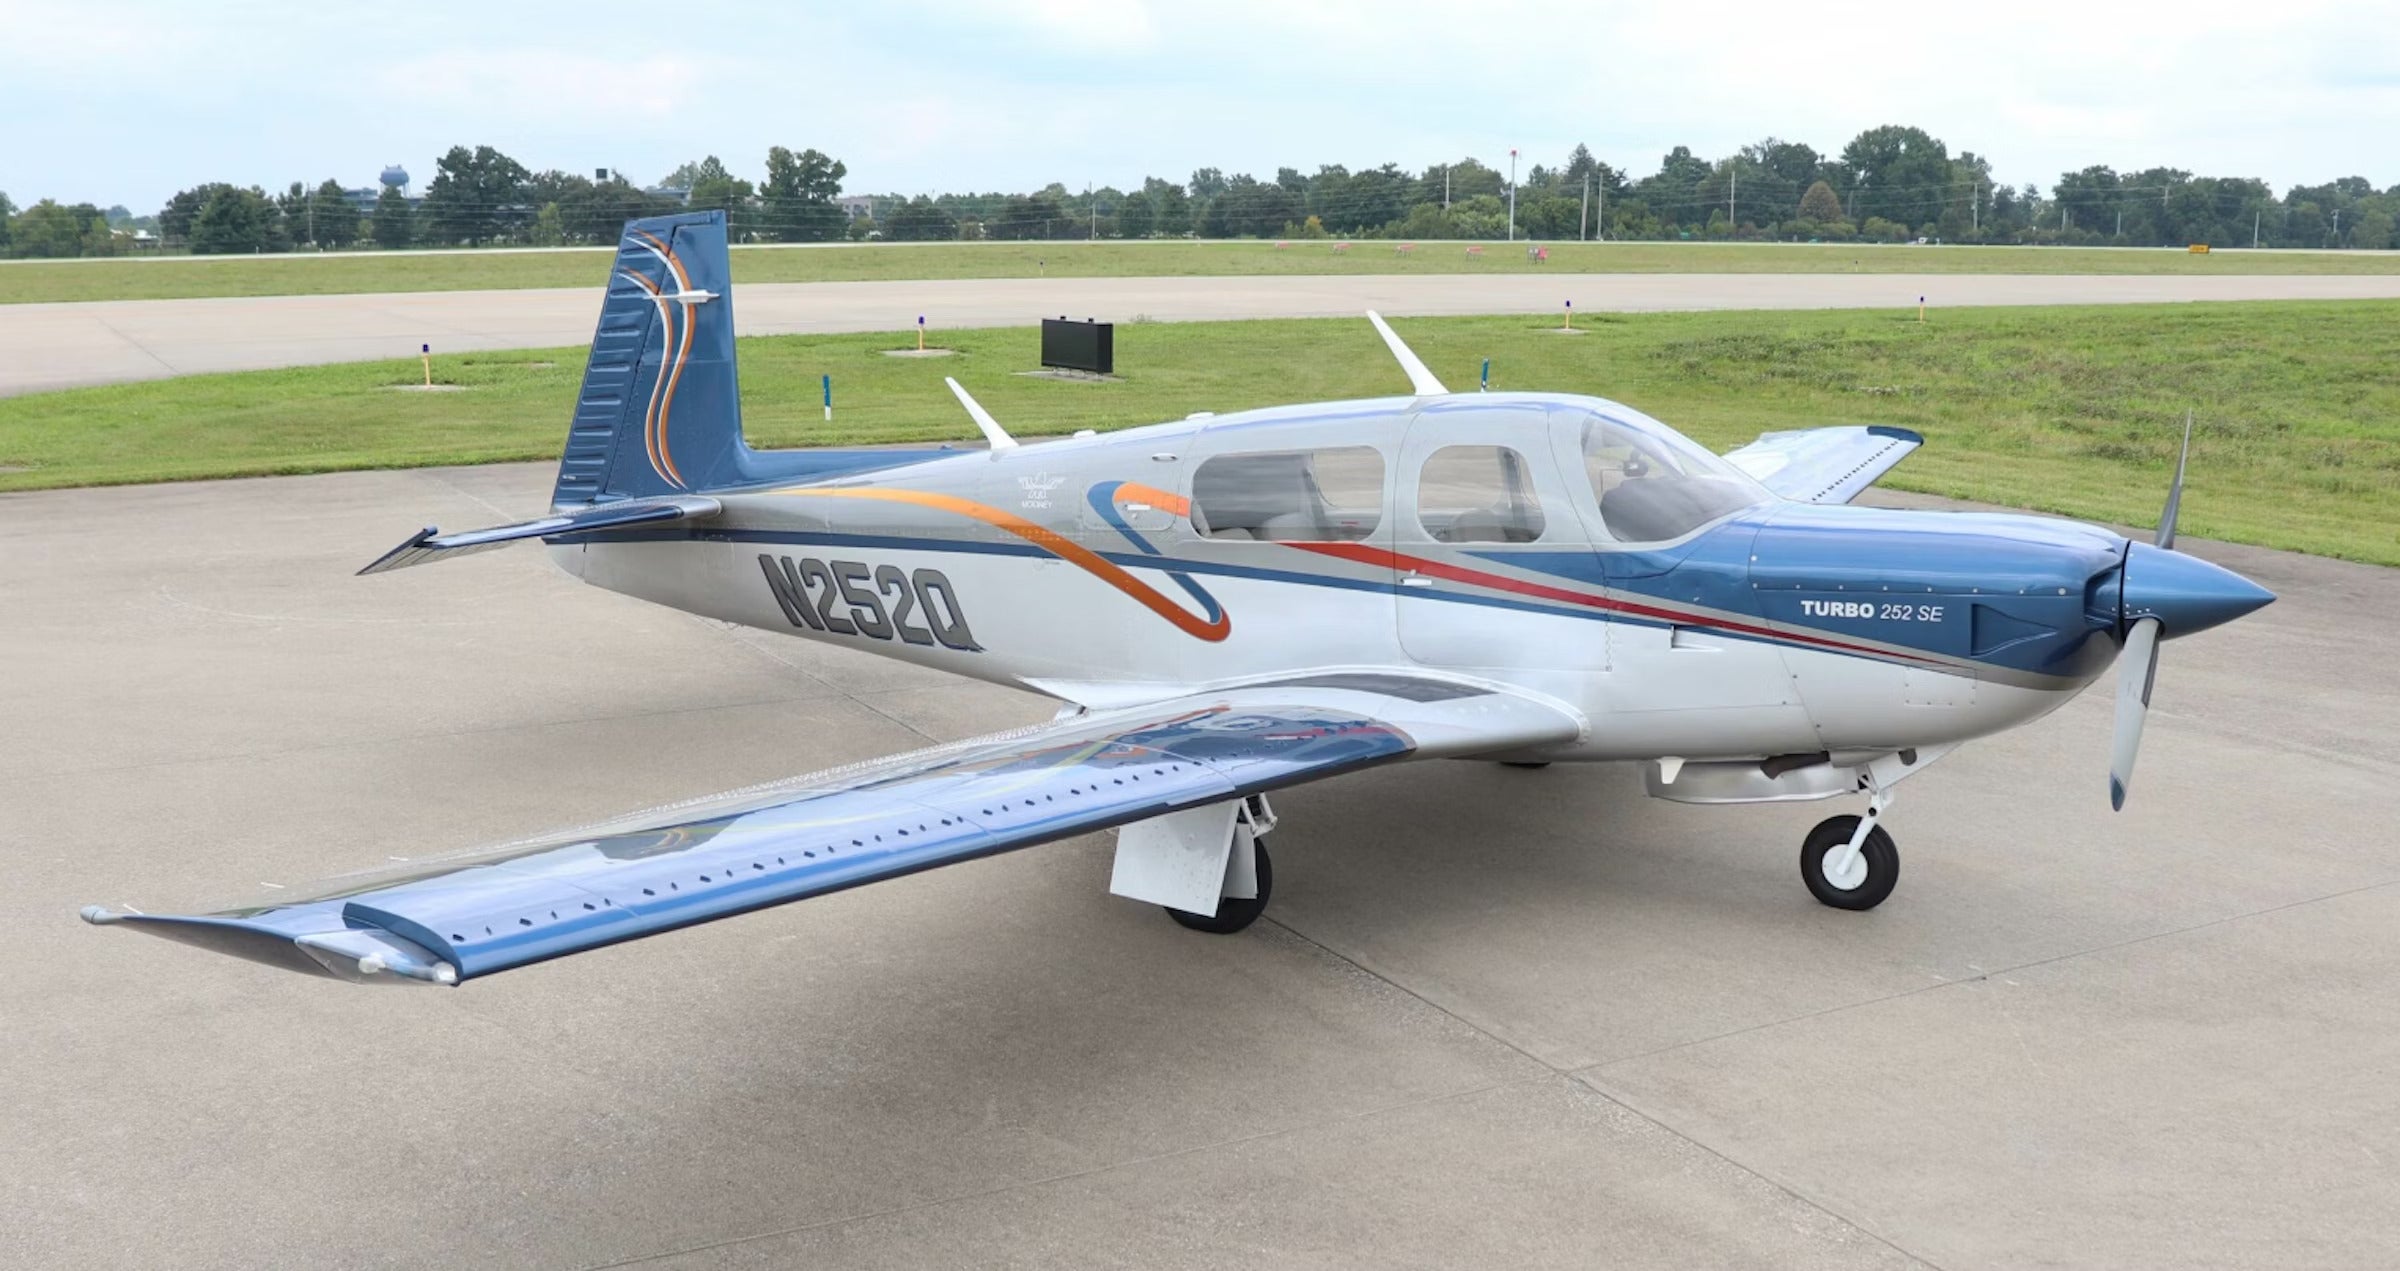 This 1988 Mooney M20K 252TSE Is an ‘AircraftForSale’ Top Pick That Does More with Less